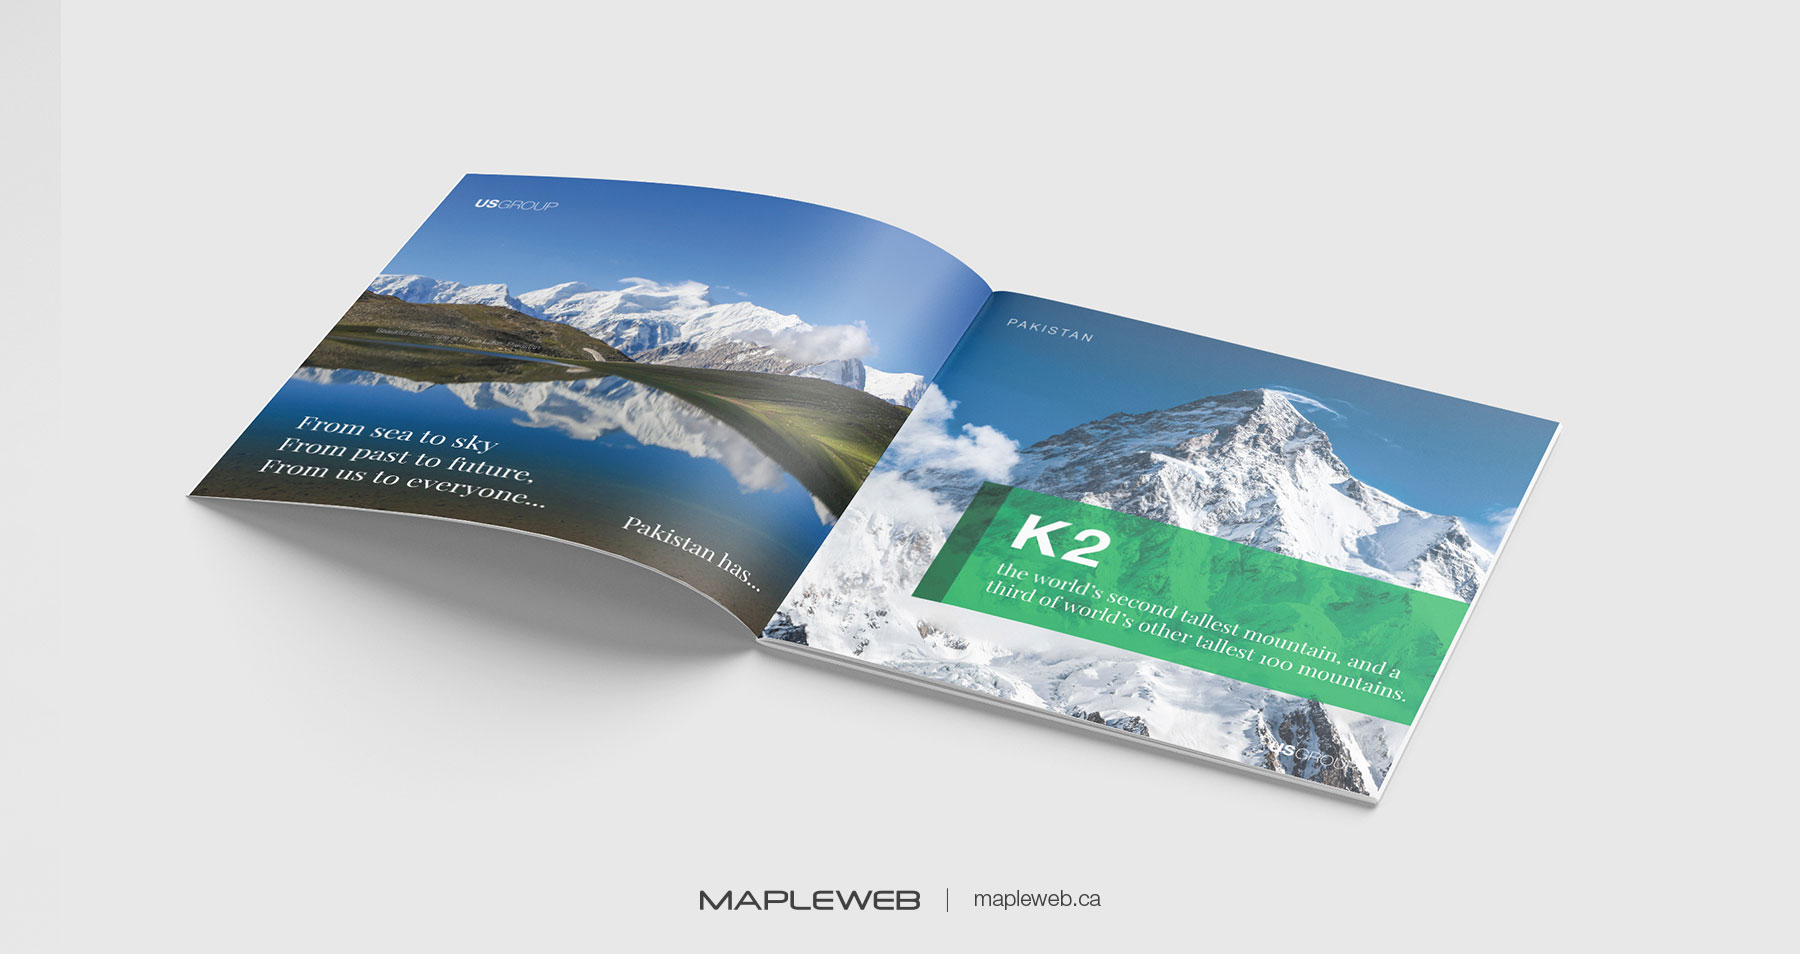 Us Group Brand design by Mapleweb Two Magazine Pages Displaying K2 World Second Tallest Mountain